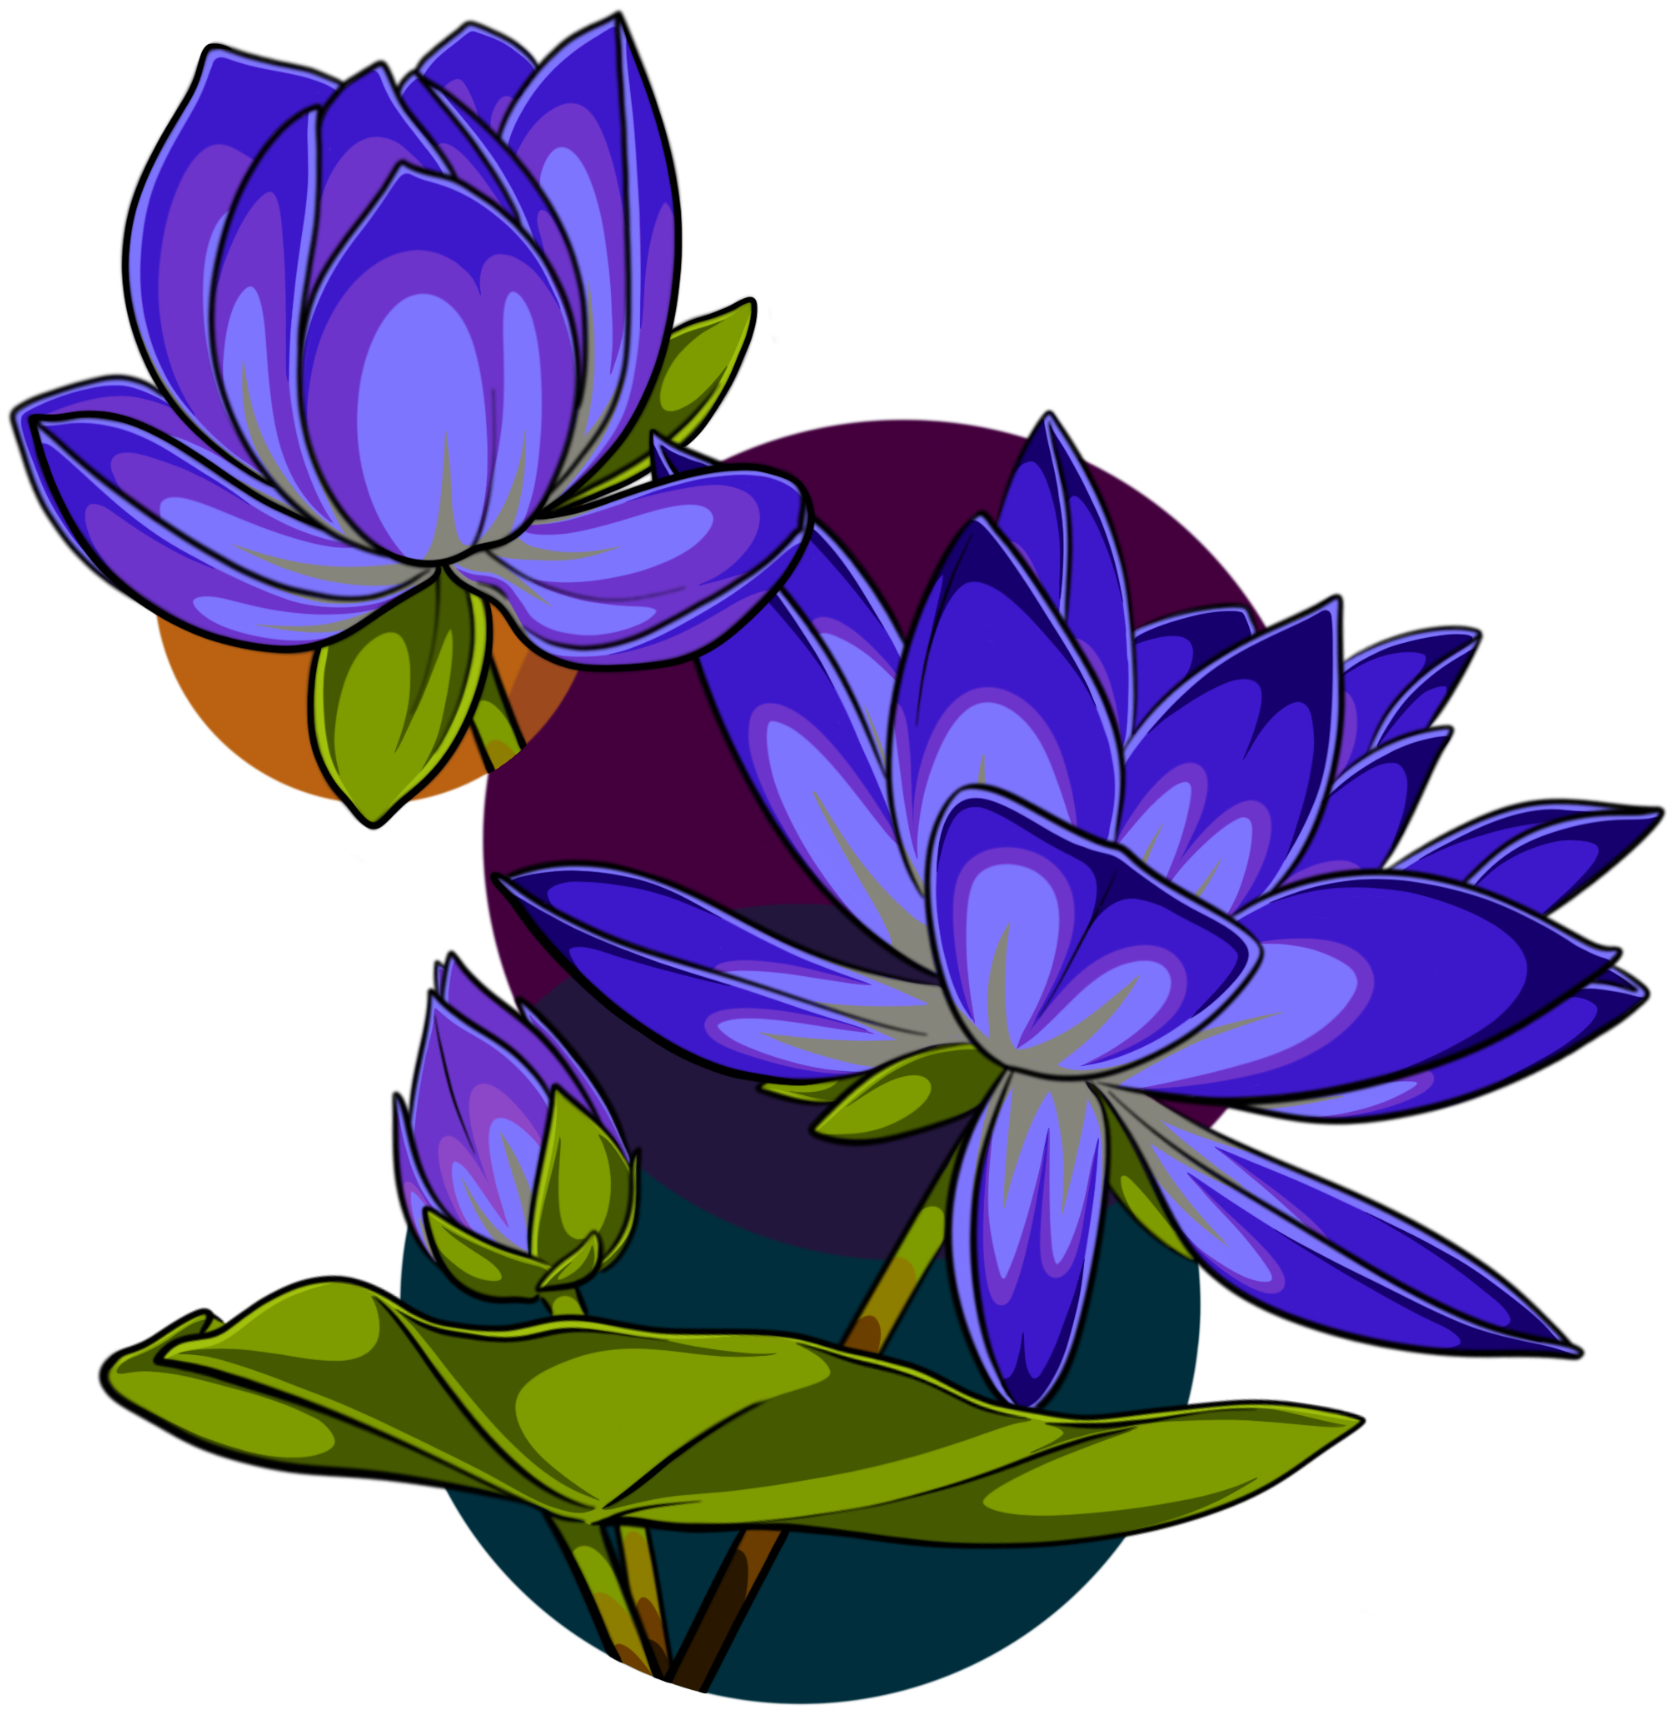 vibrant purple lotus flowers over colored circles